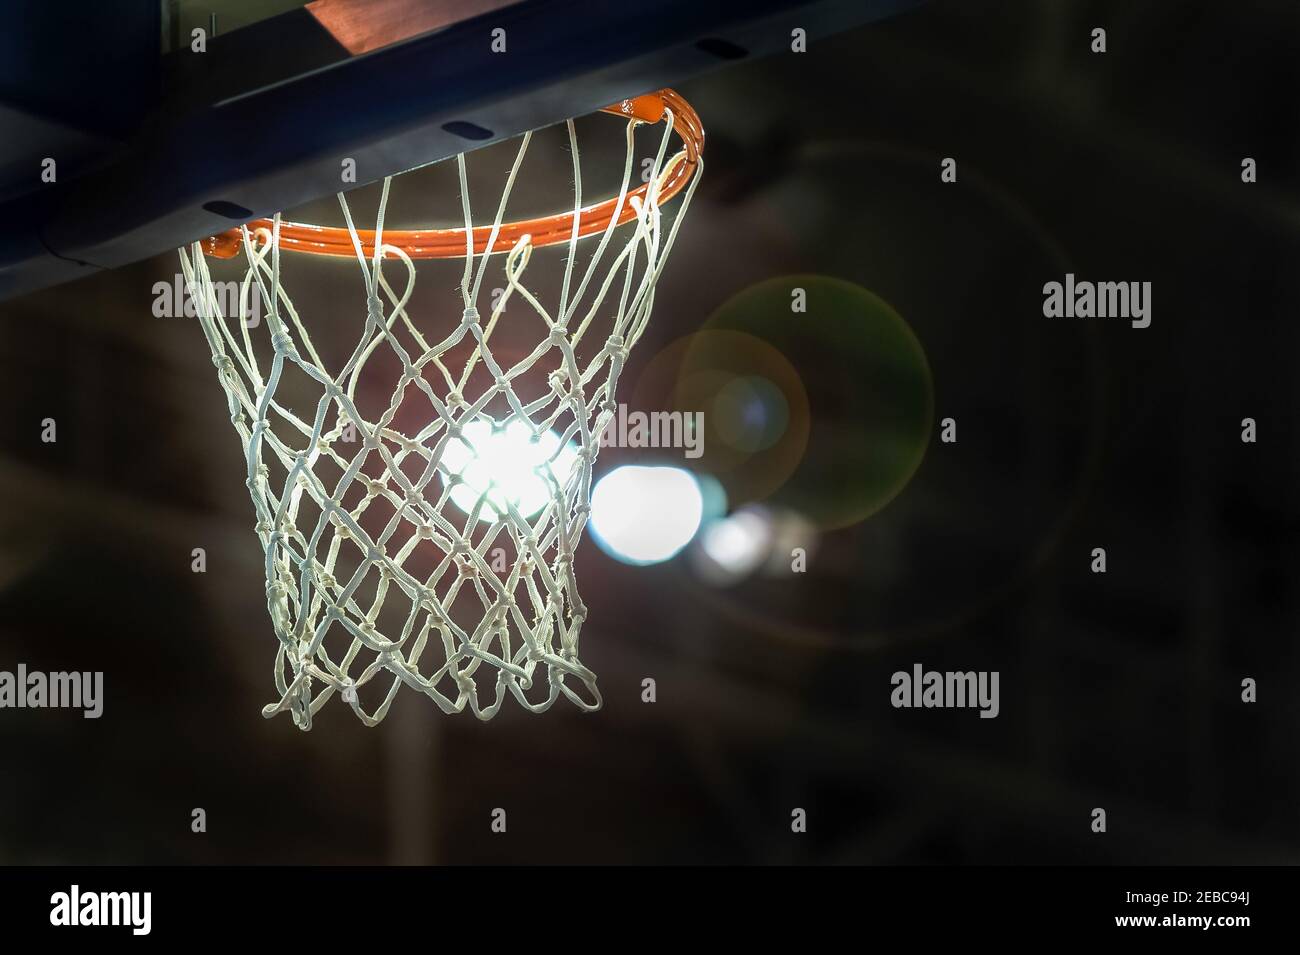 Toronto 2015 Pan Am or Pan American Games, women basketball: Close up of the basketball hoop in a strong backlight Stock Photo